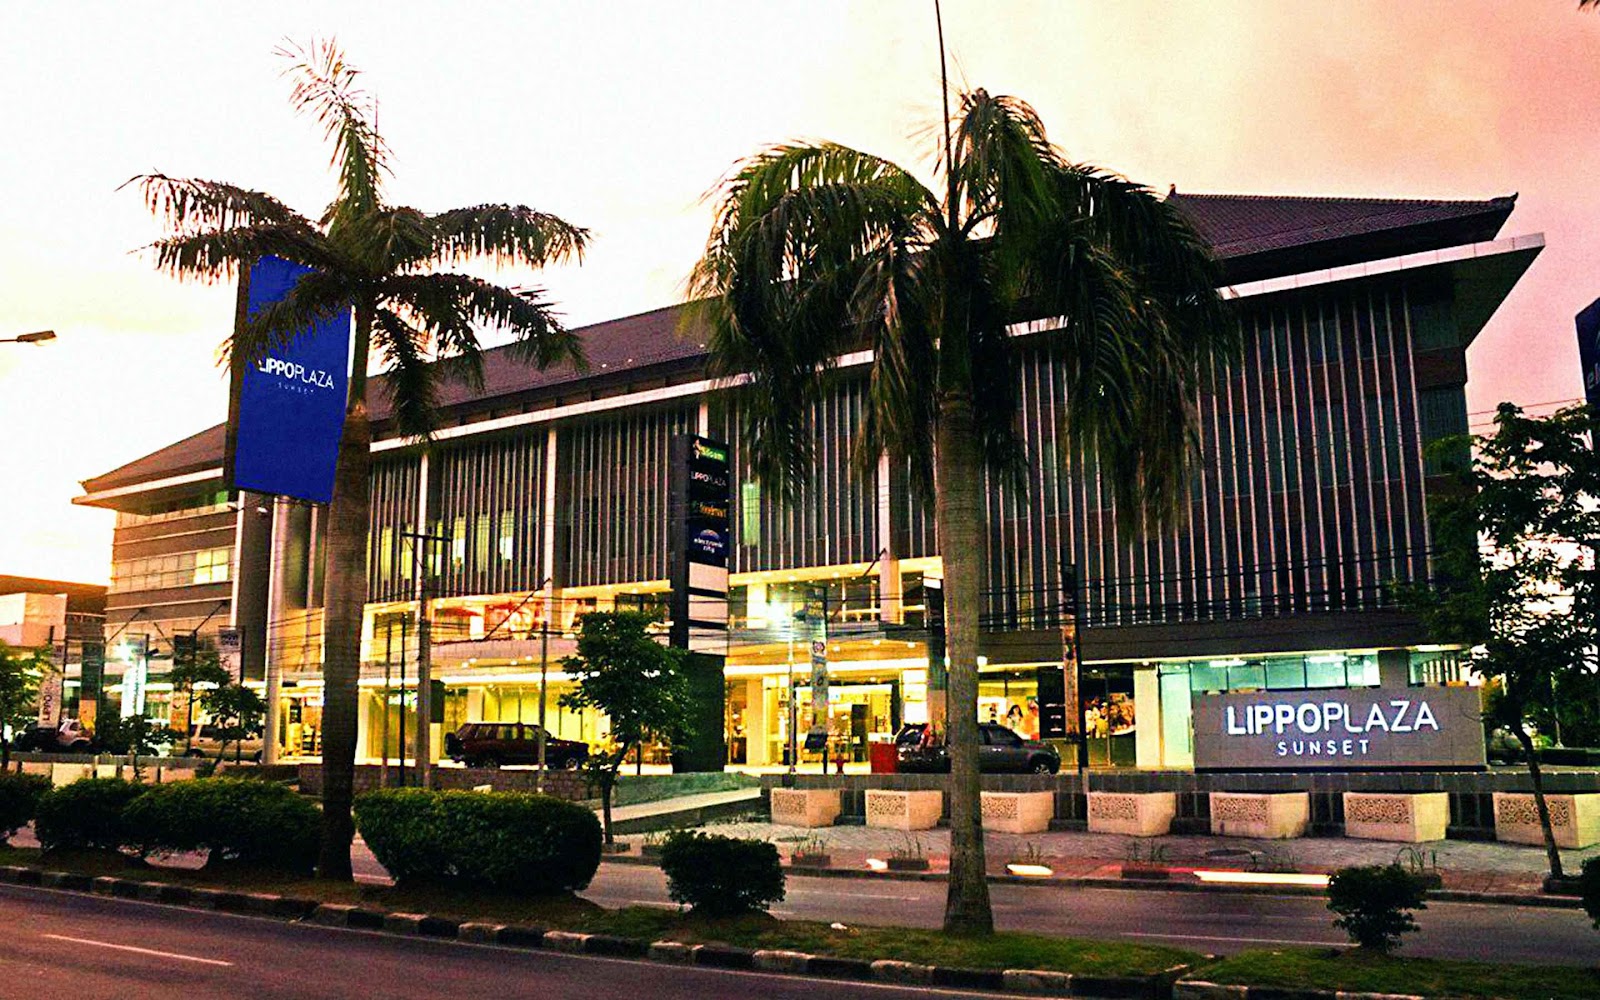 Lippo Plaza Sunset - Malls in Bali: From Seaside to Center of the City